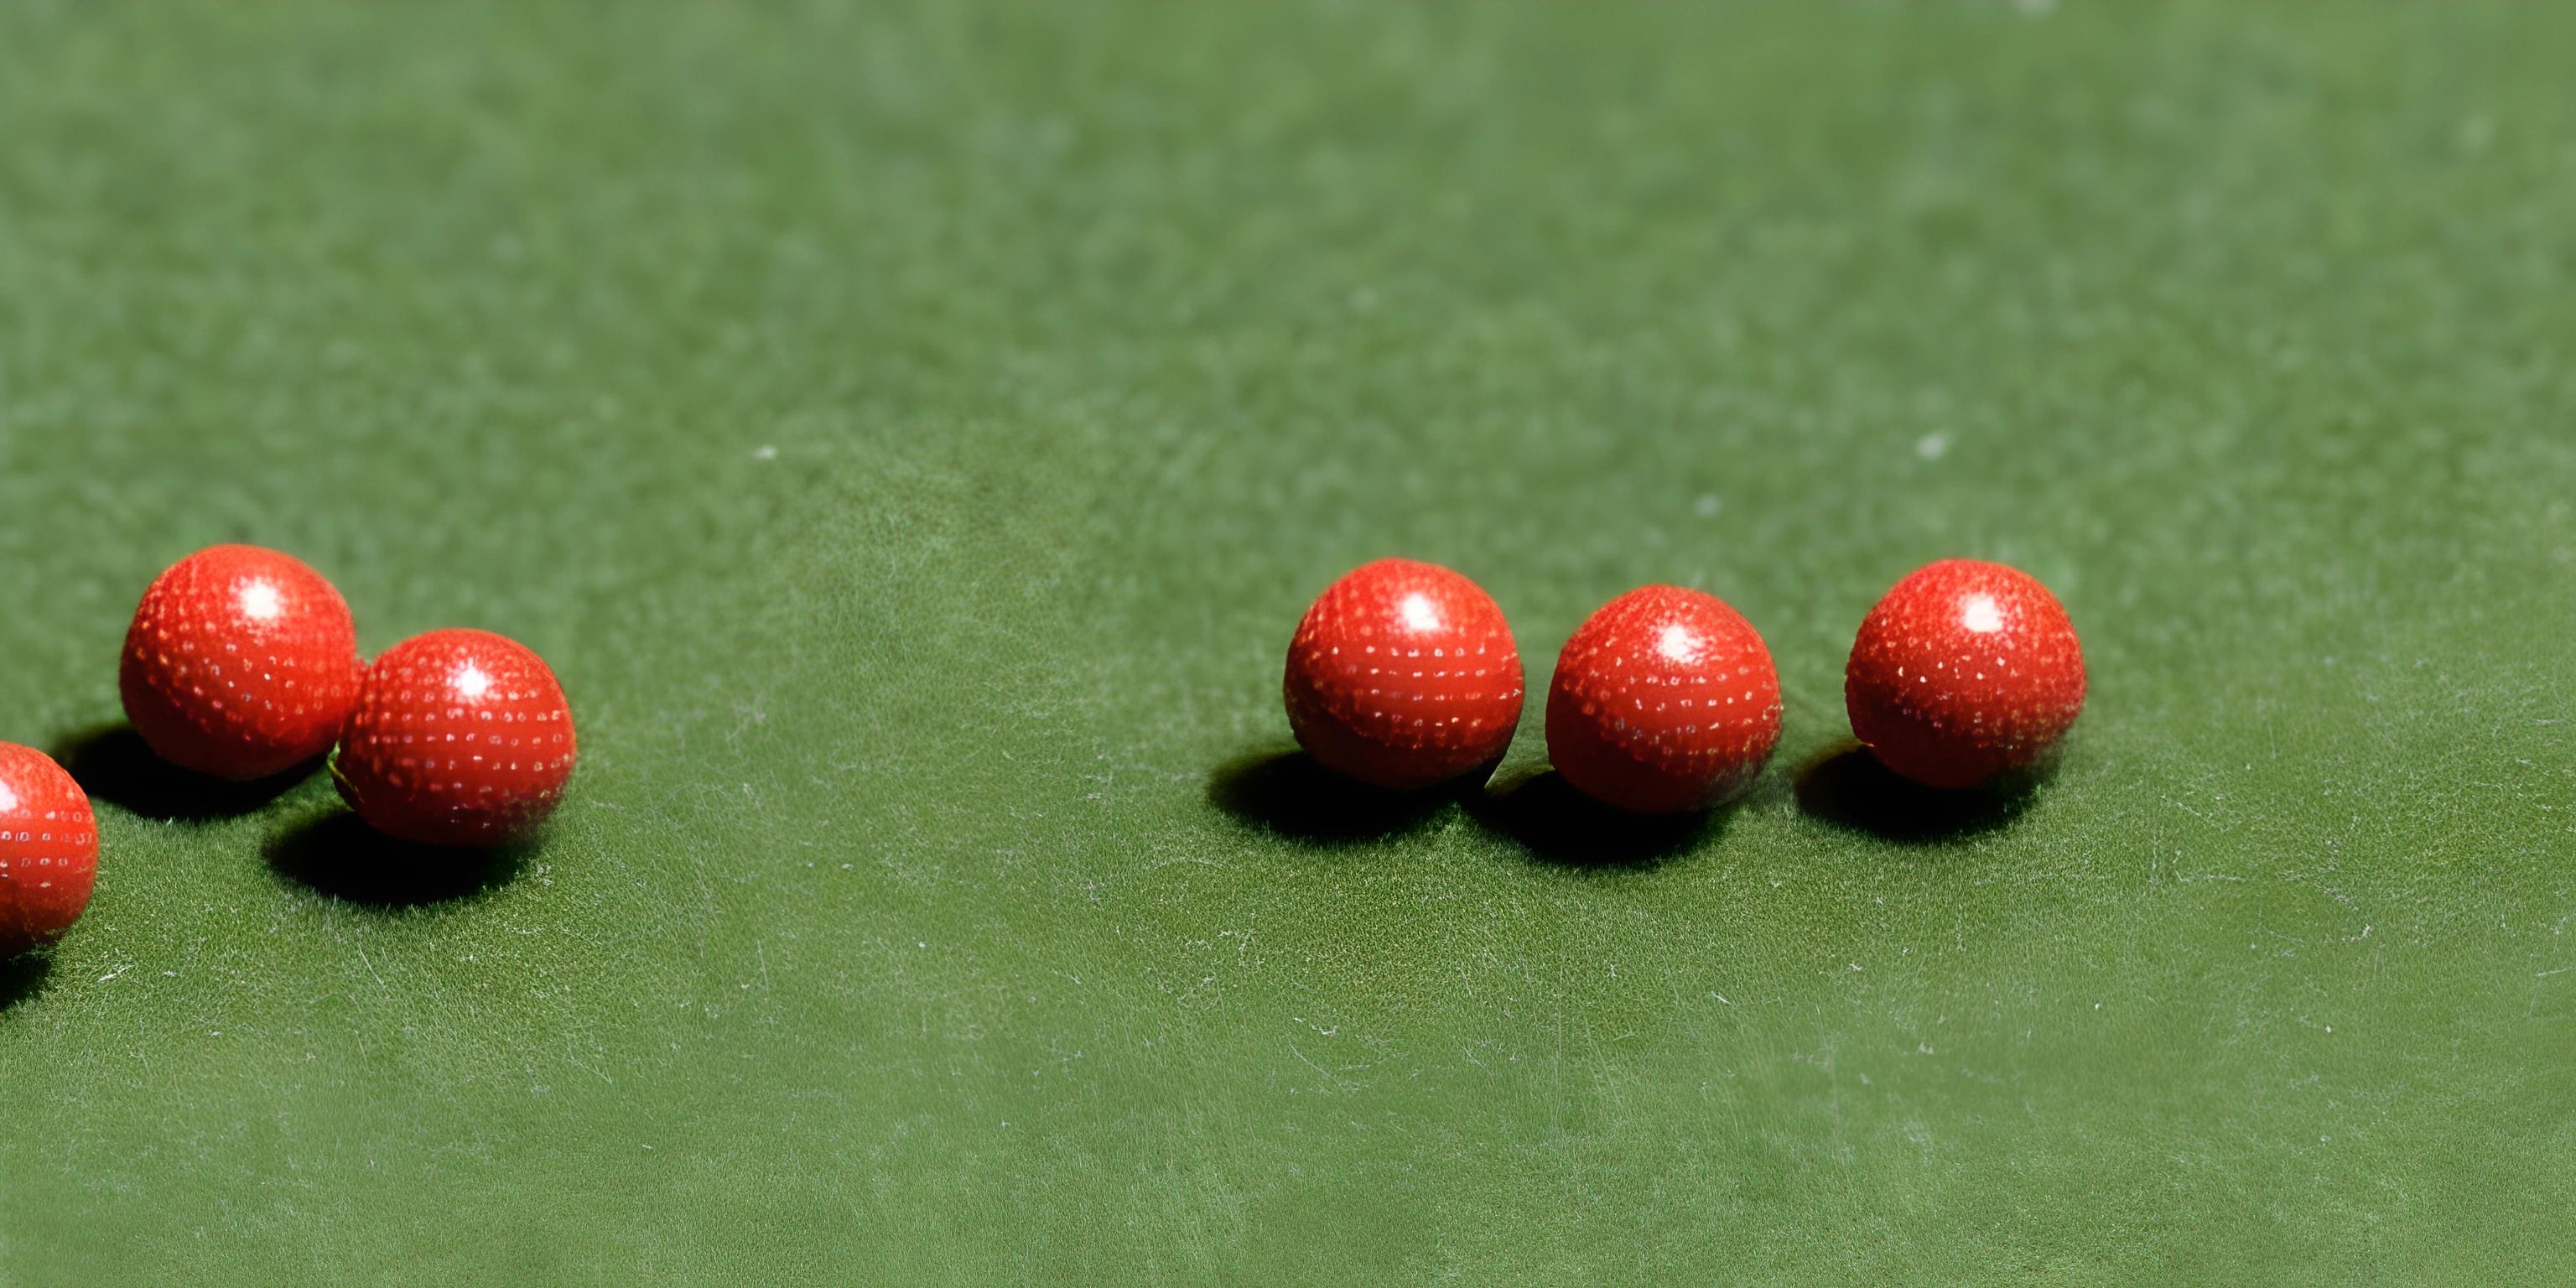 red balls are in the middle of a row on a green tablecloth with one red ball between them